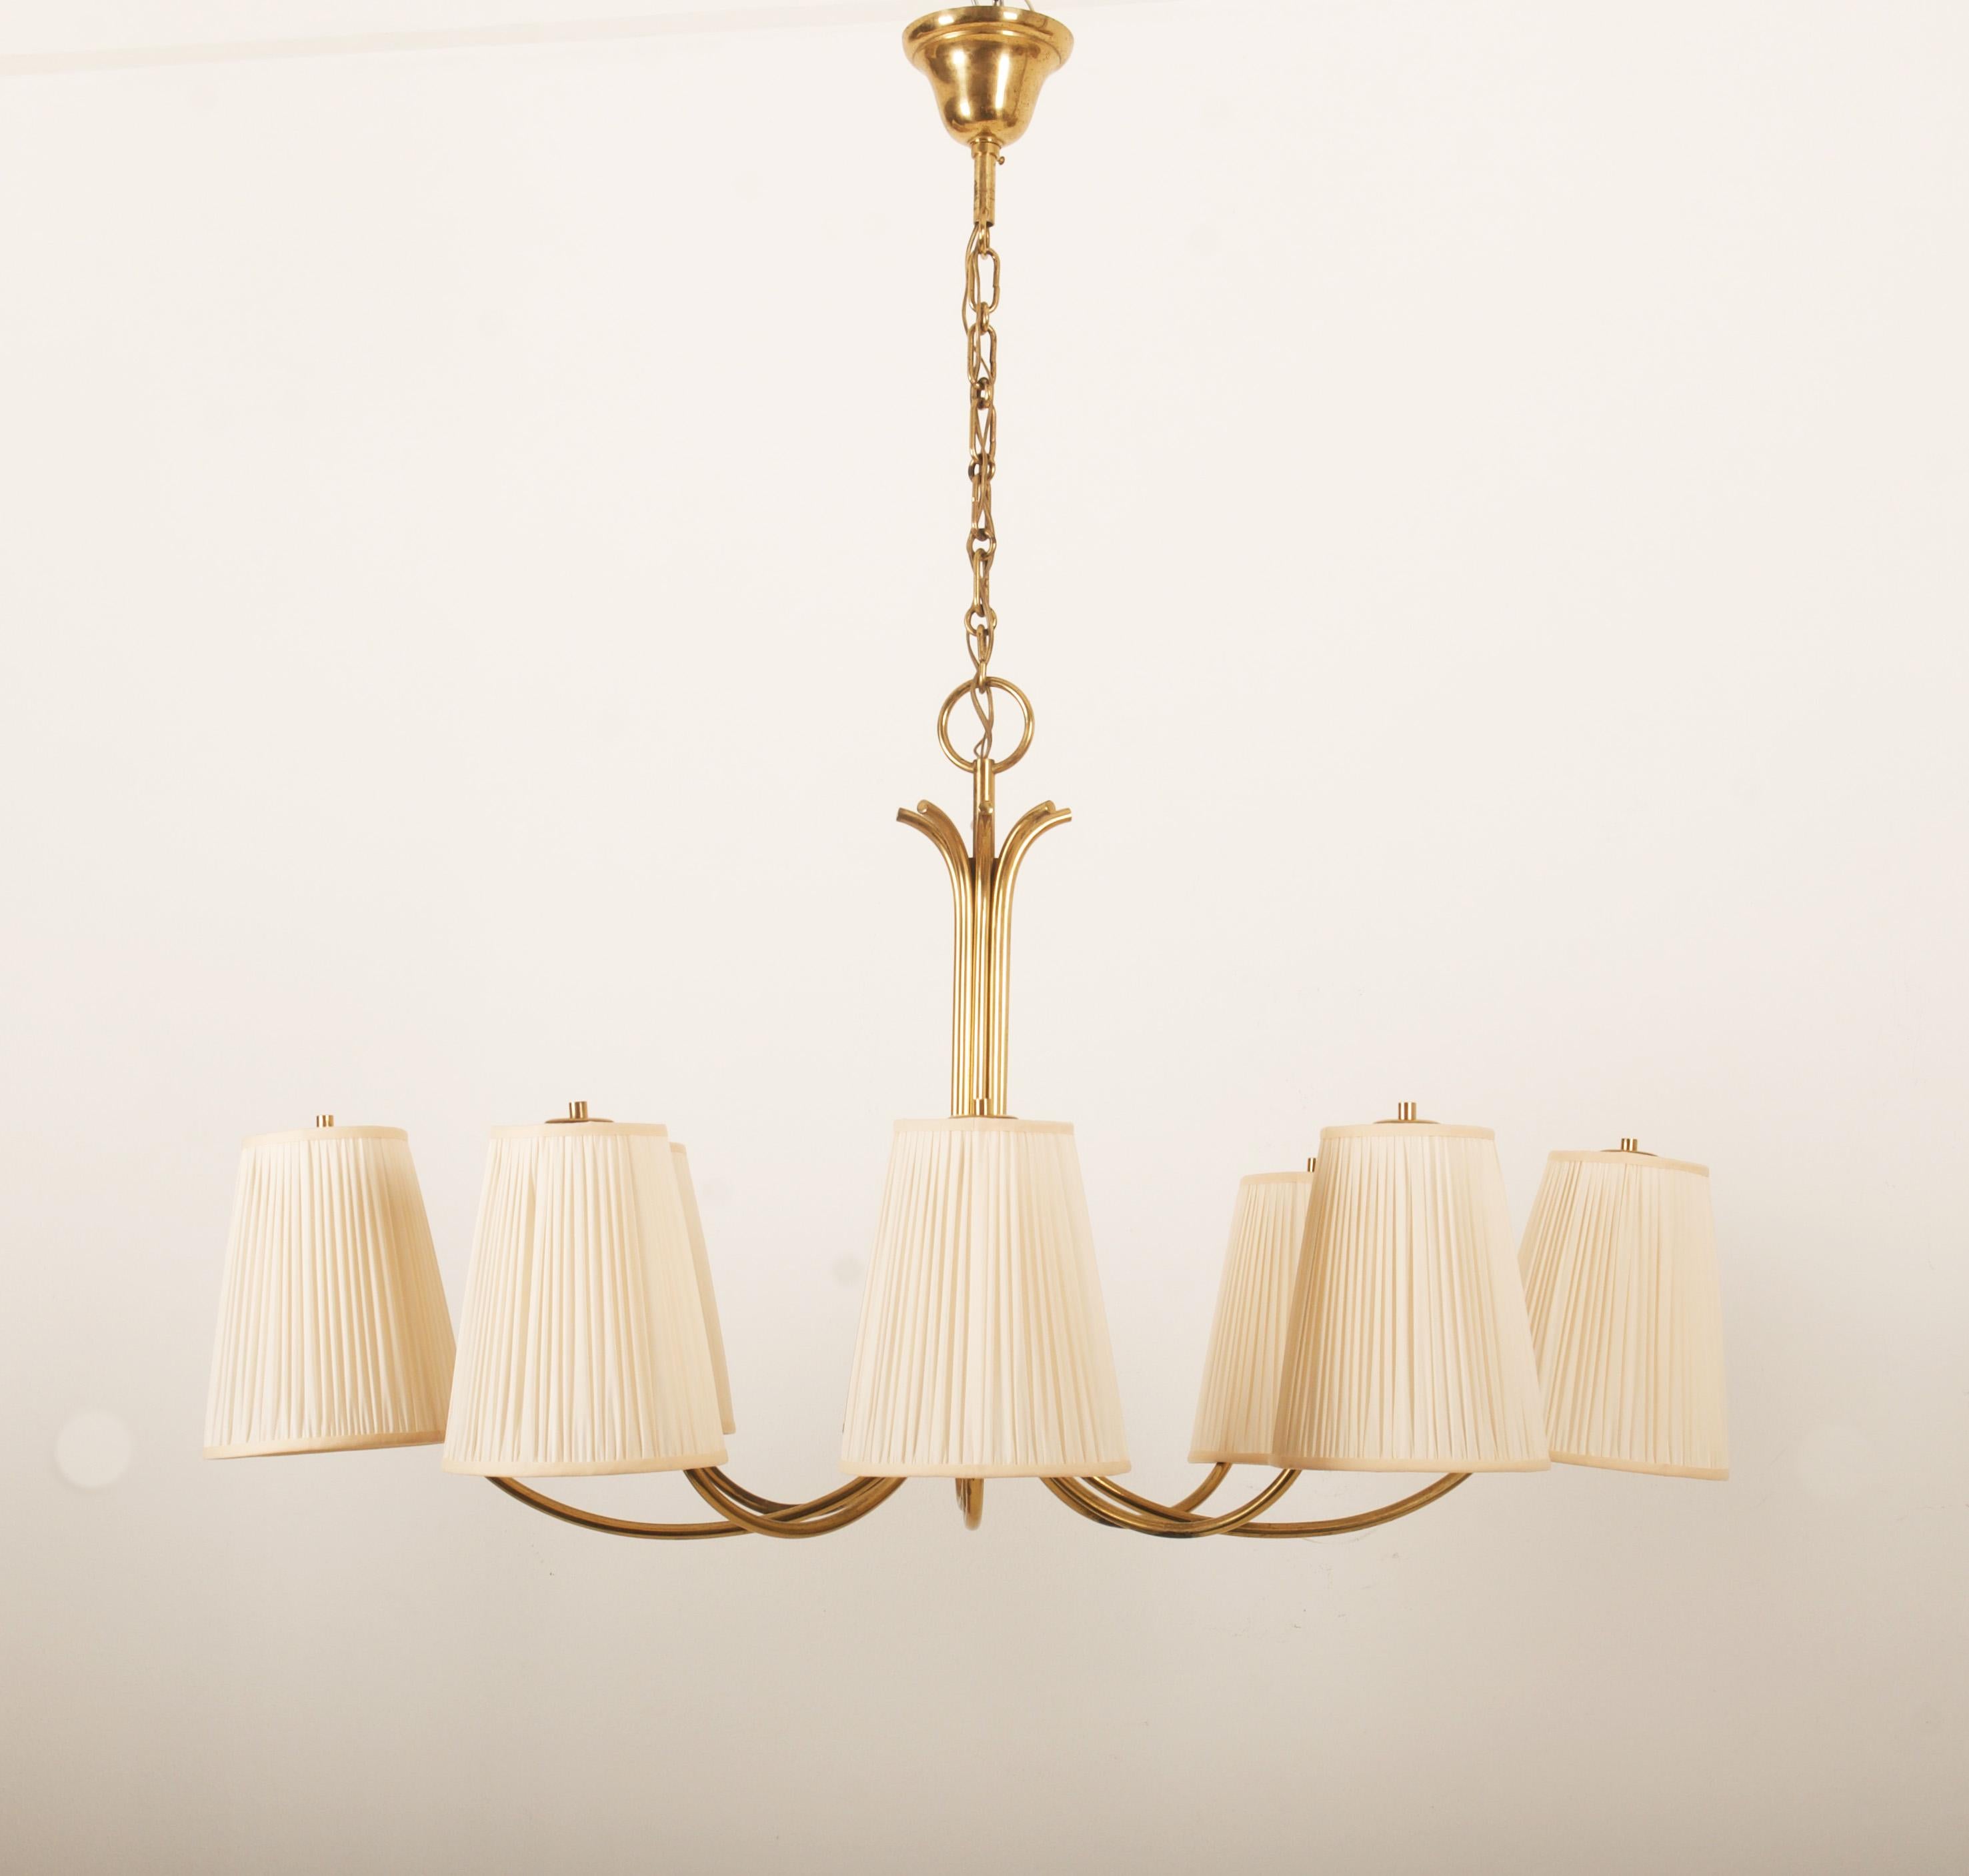 Rare Eight Arms Chandelier by Josef Frank for Kalmar 3